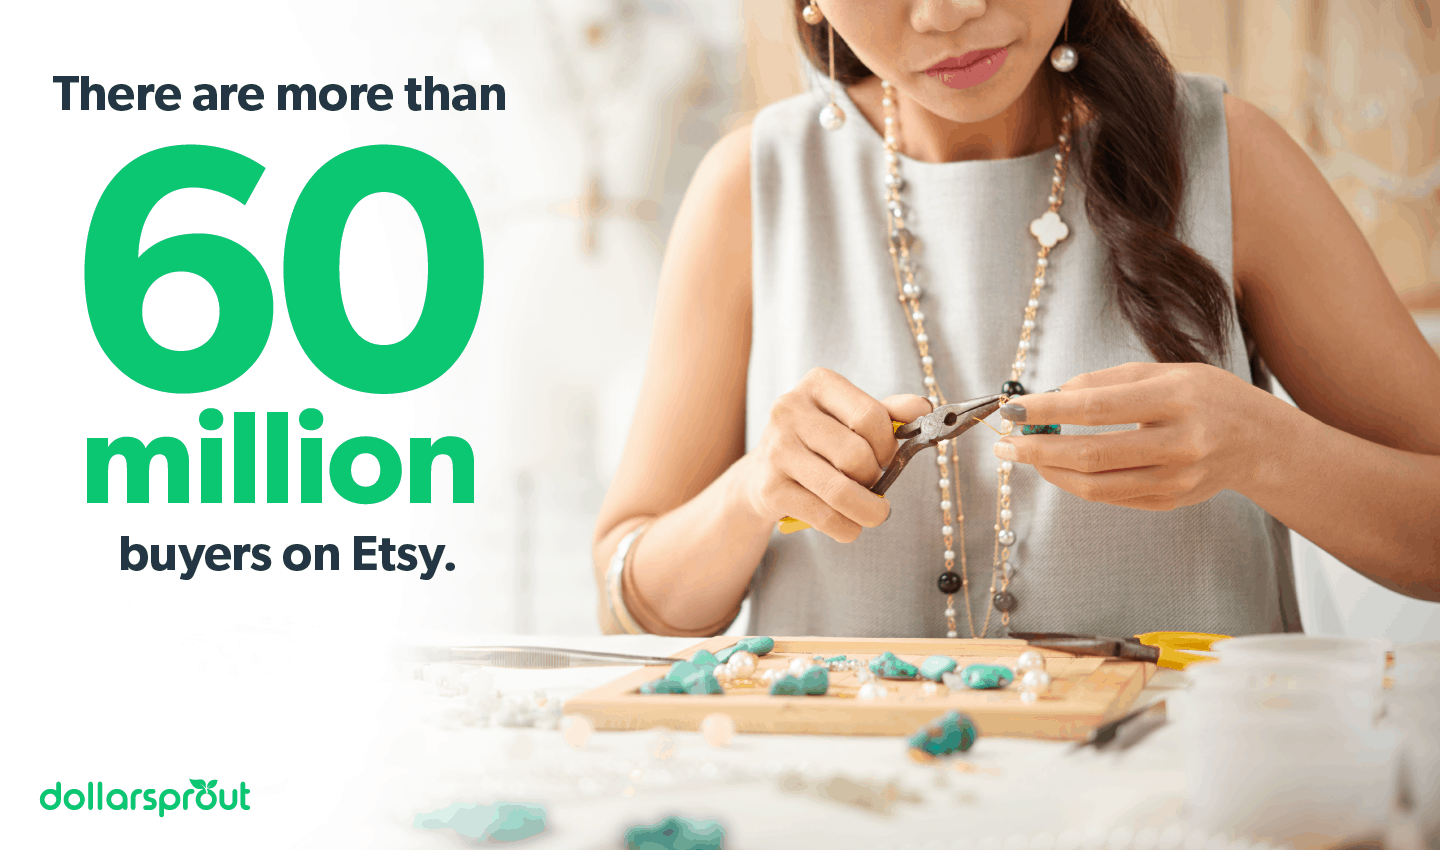 Number of buyers on Etsy